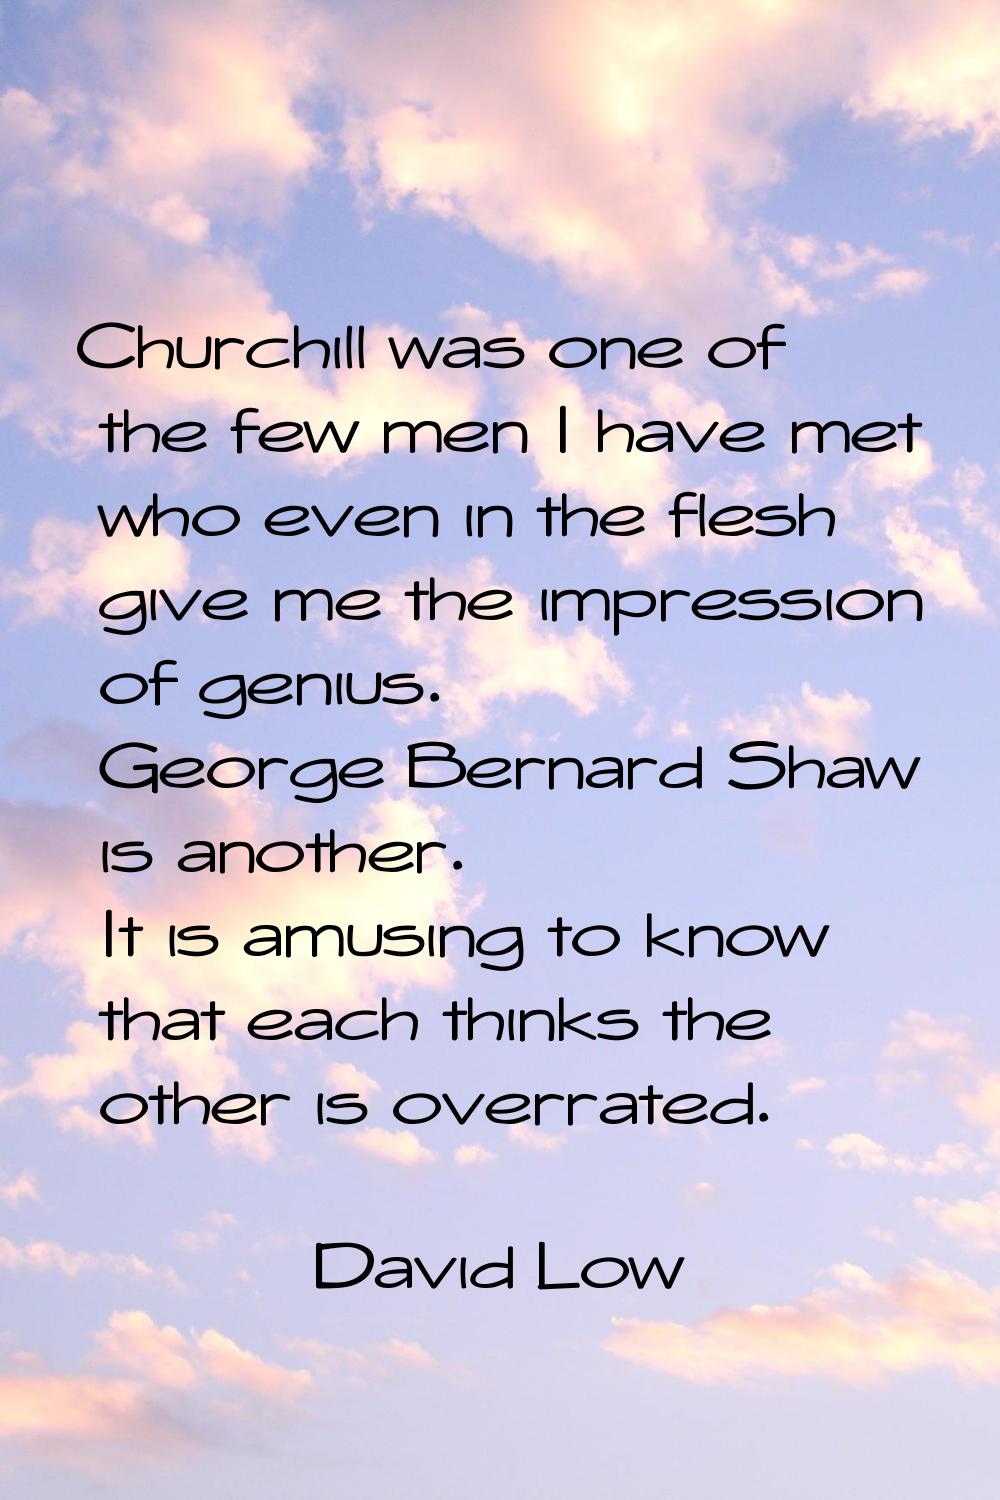 Churchill was one of the few men I have met who even in the flesh give me the impression of genius.